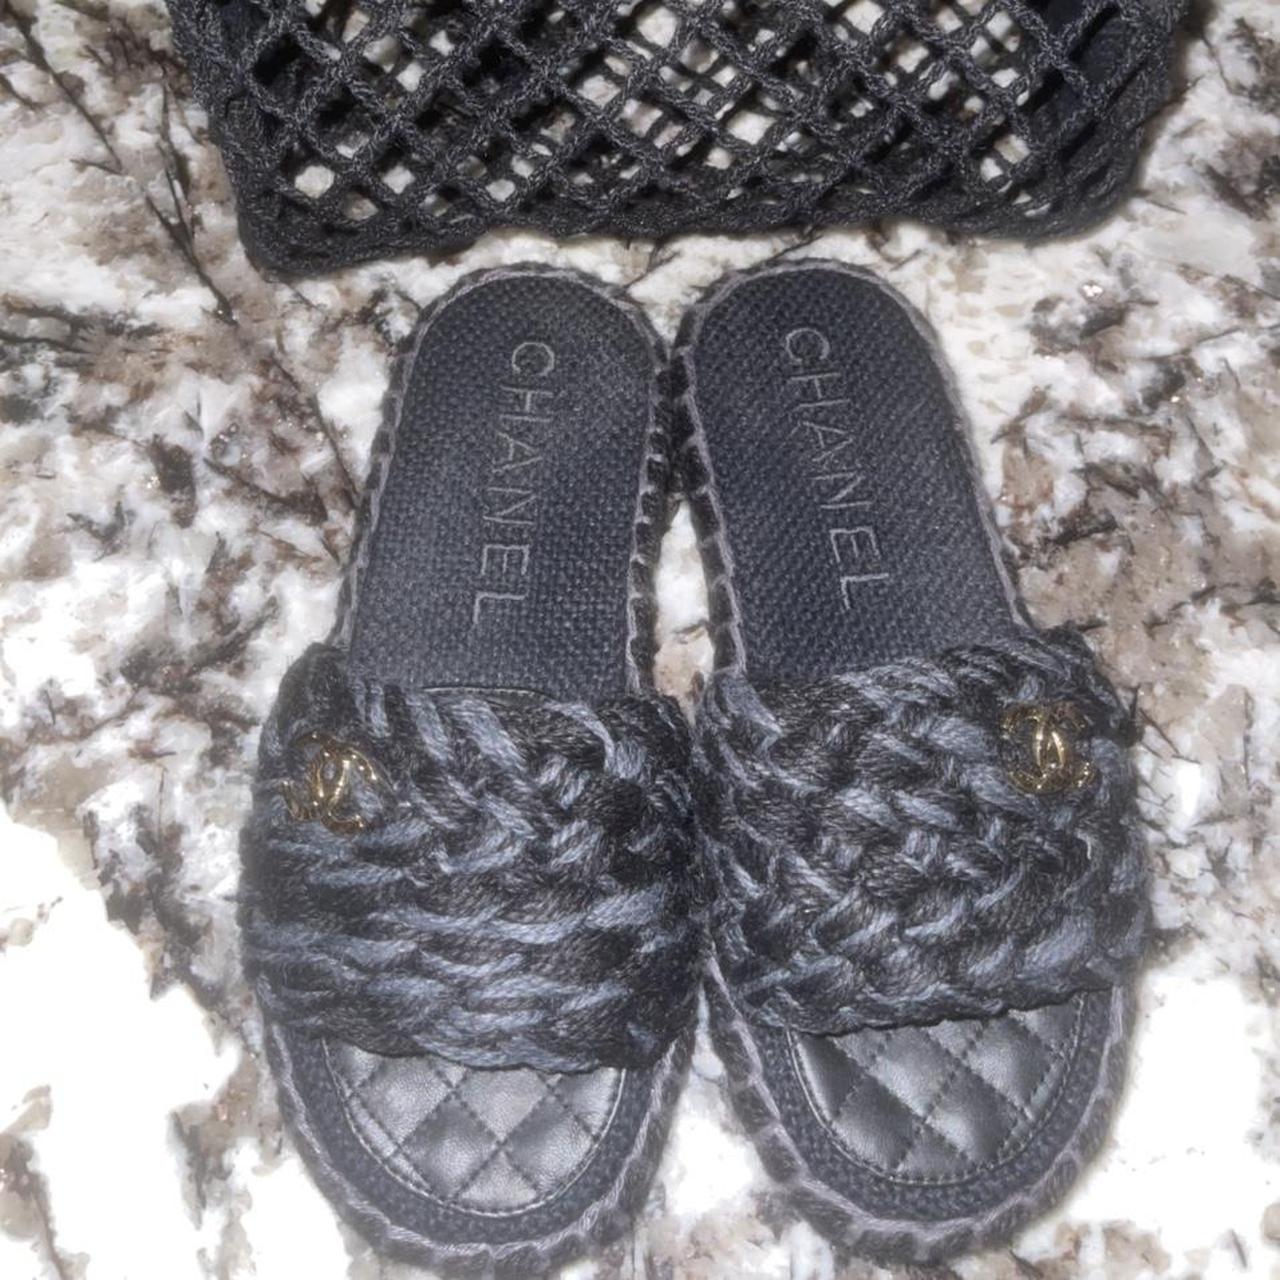 Chanel Braided Knit sandals. Black / navy. Size 38.